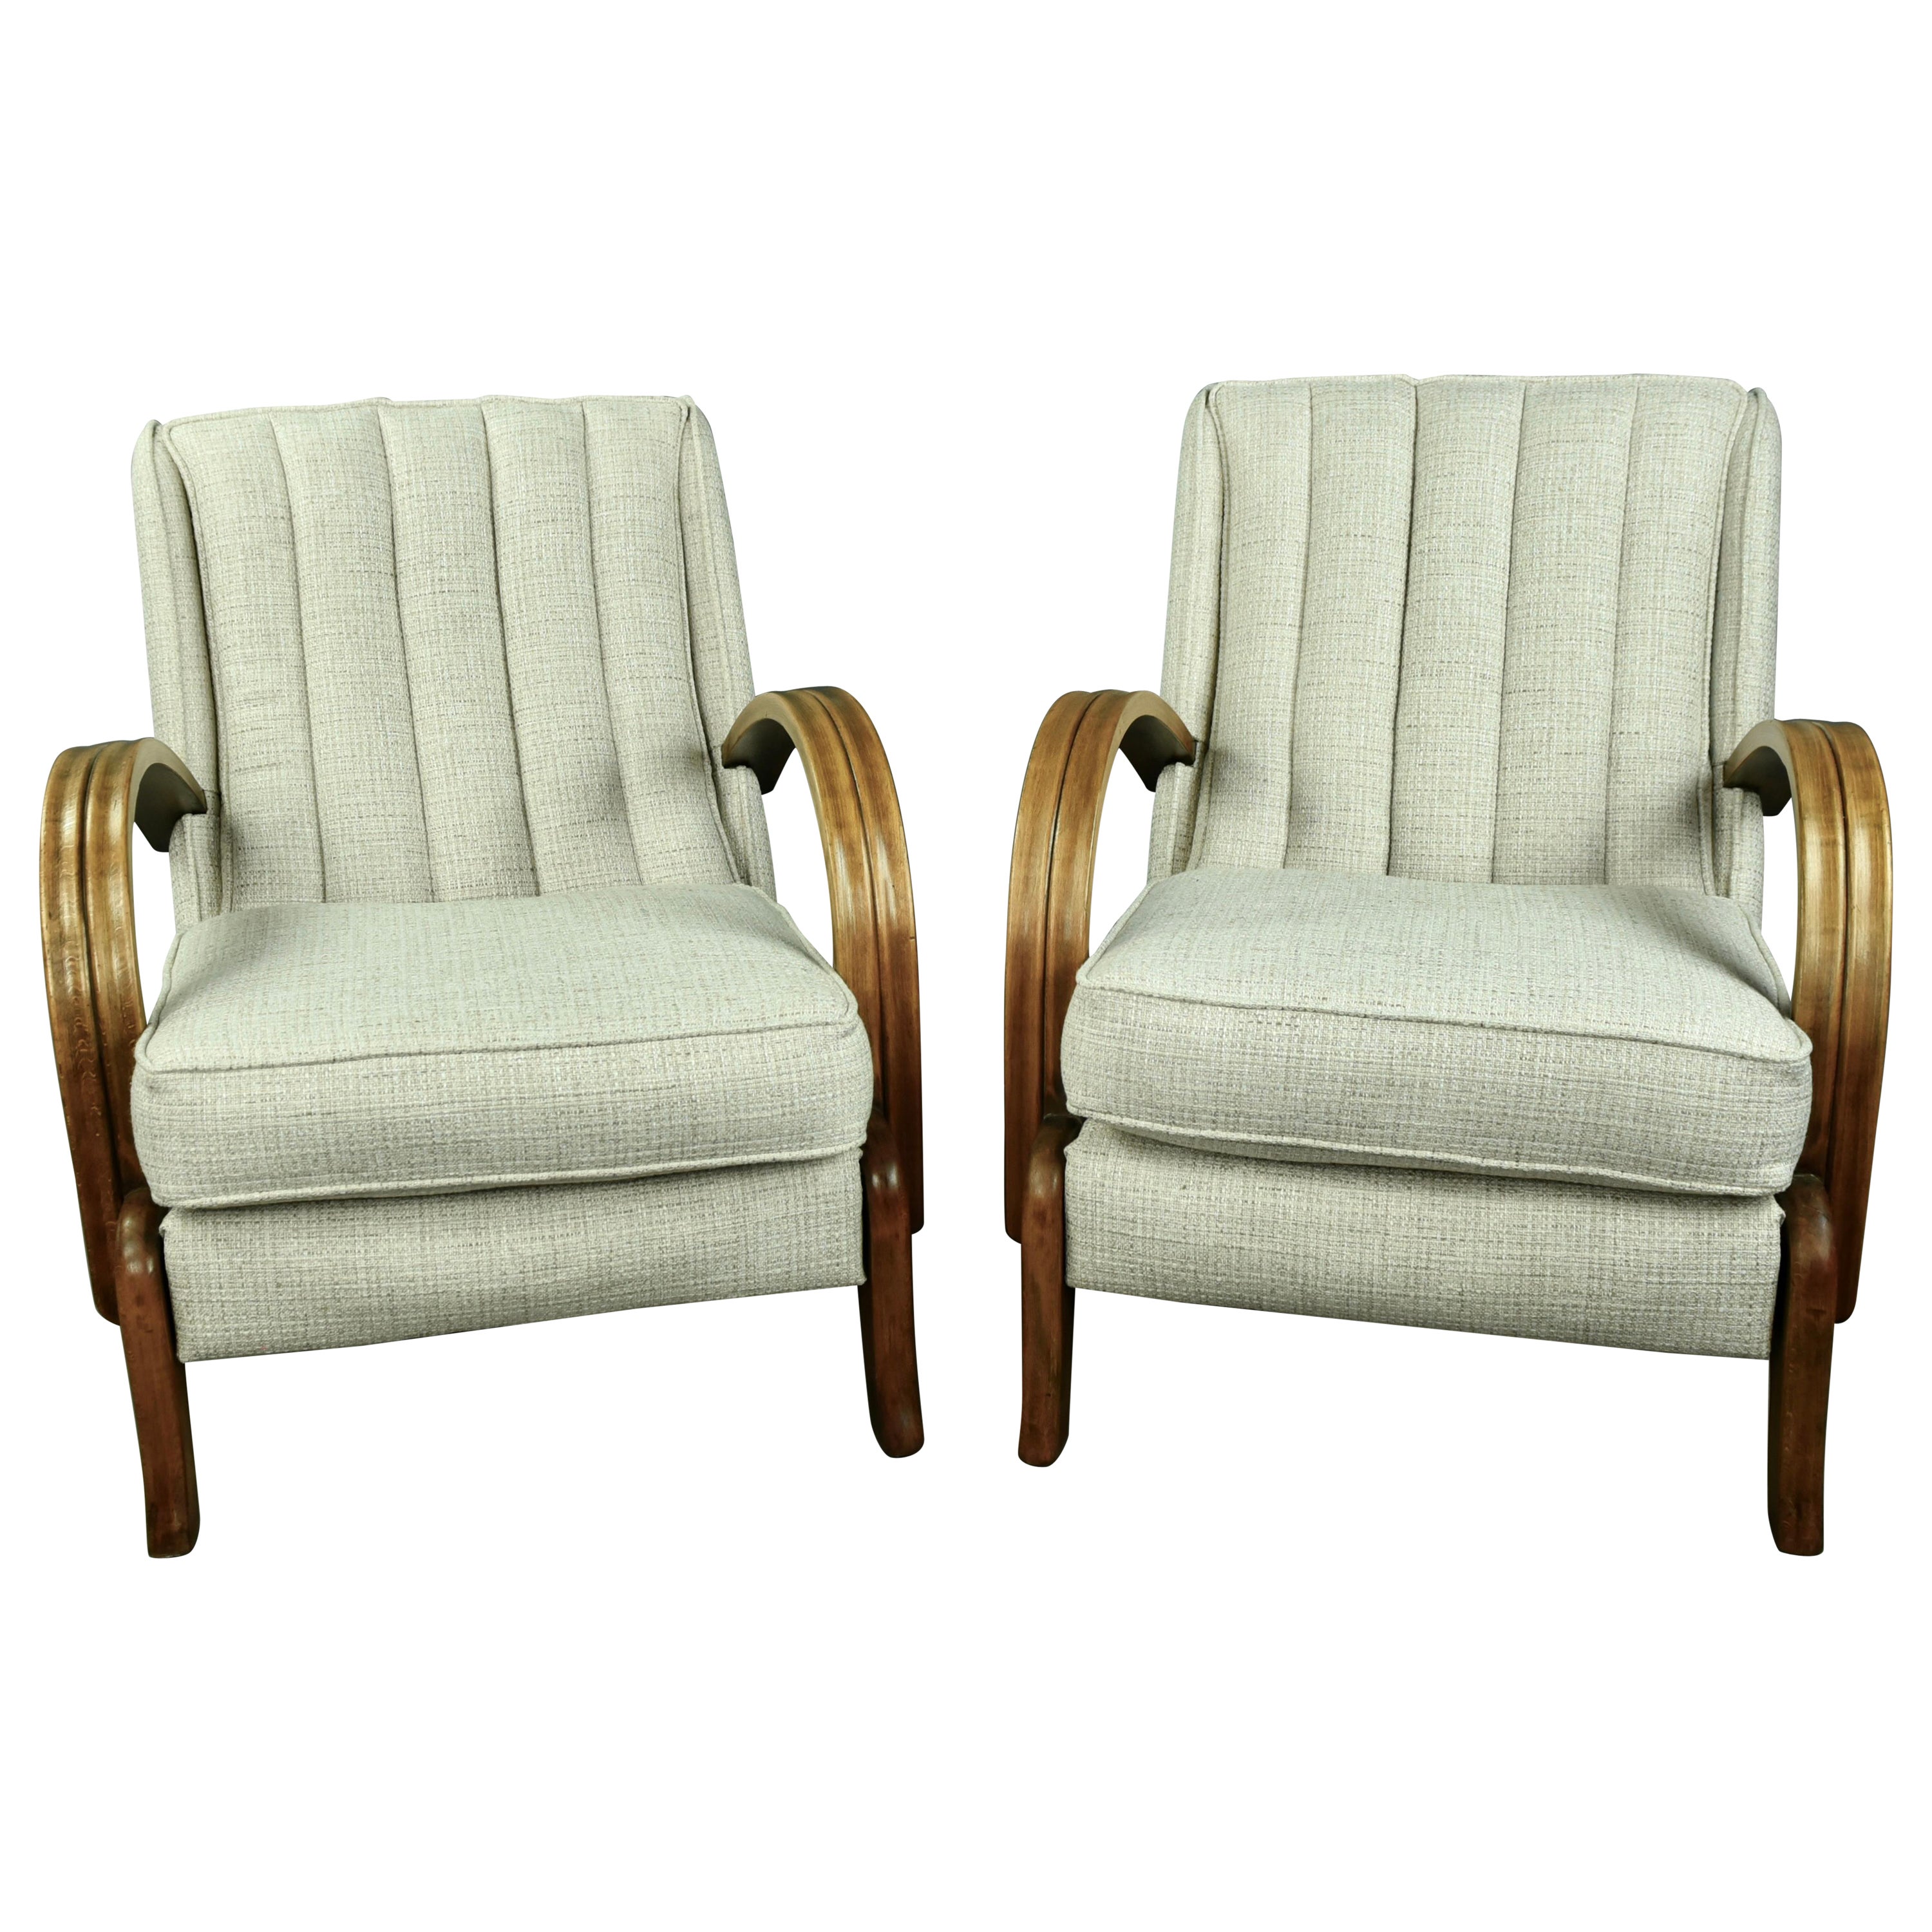 Pair of Vintage mid century retro arm chairs  For Sale